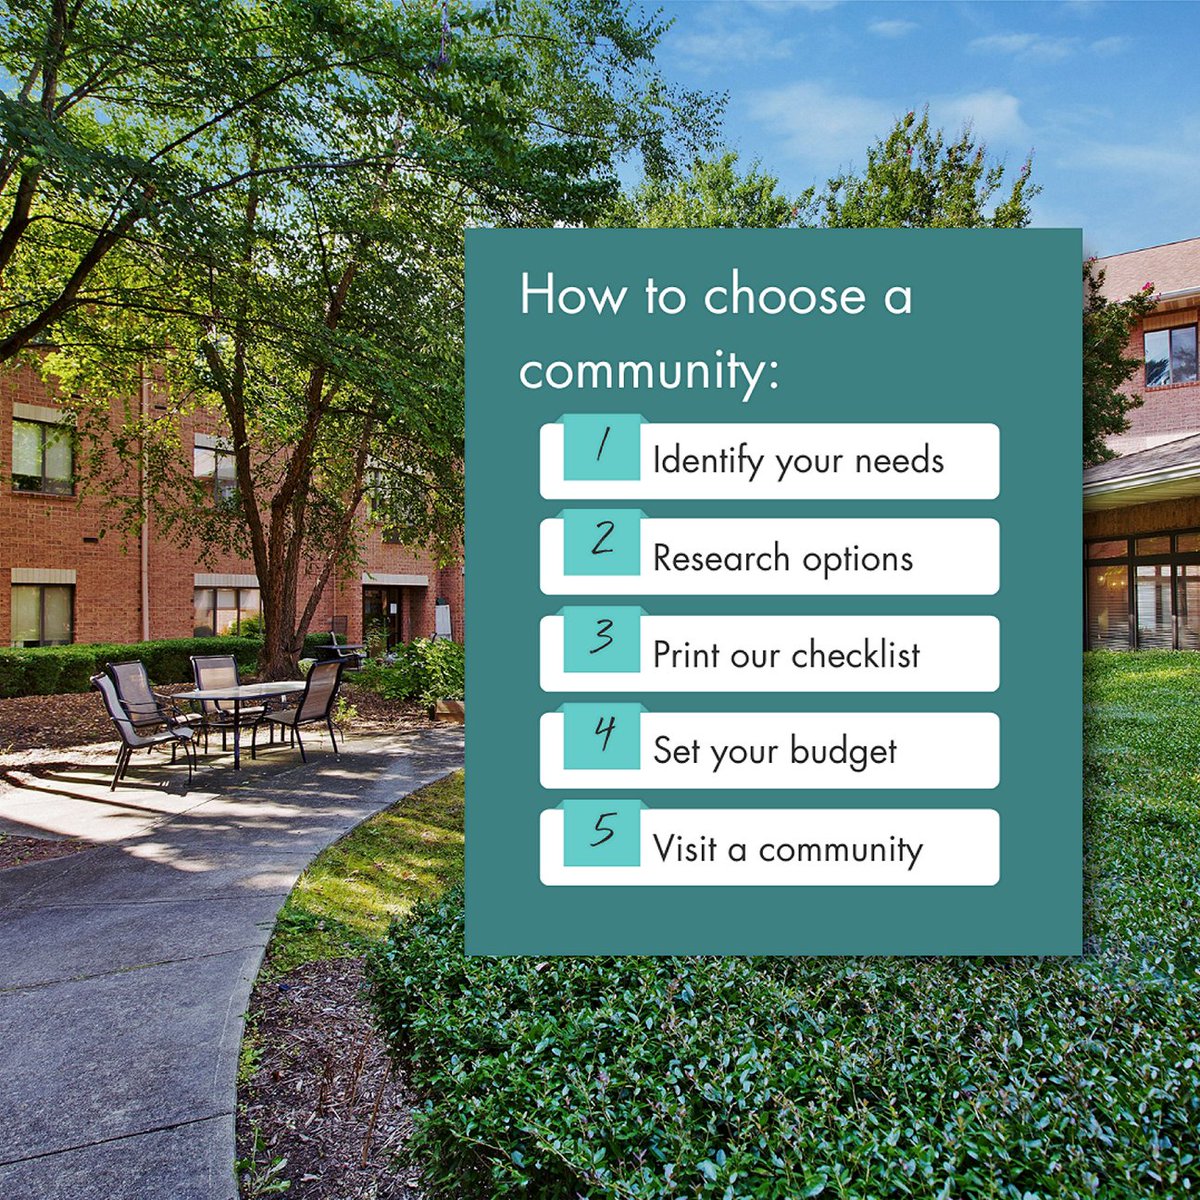 Stop by our website to explore suggestions on how to choose a senior living community. We also offer financial planning tools and a tour checklist to guide you on making the best possible decision for you. Link in bio #SonidaSeniorLiving #FindYourJoyHere #ChoosingSeniorLiving